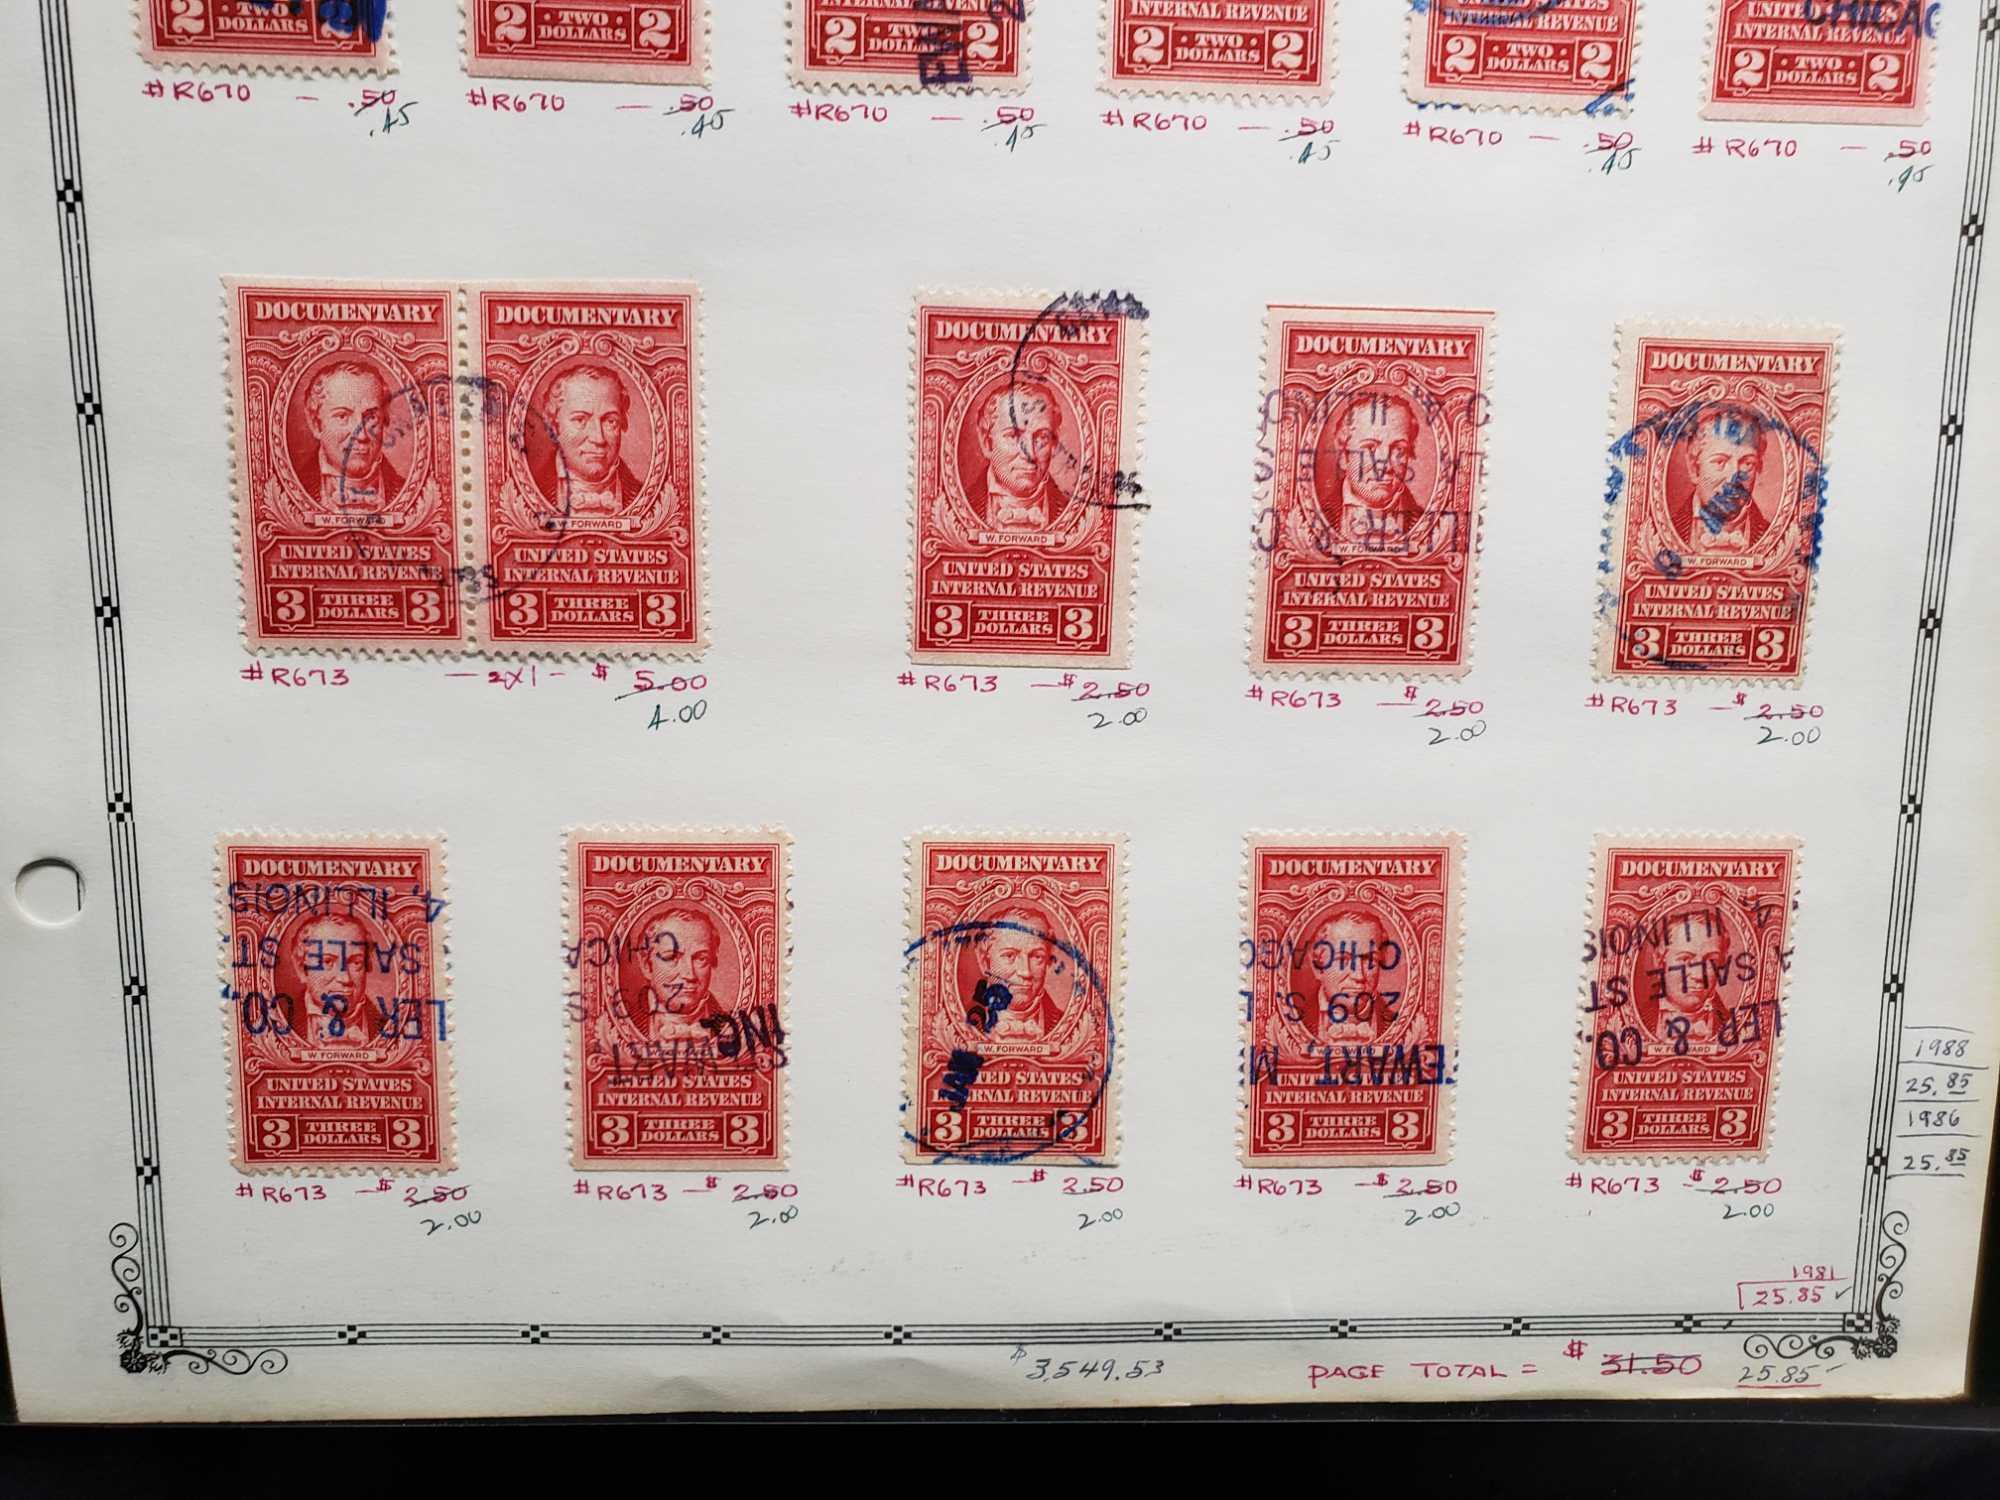 US Stamps Documentary Series 1954